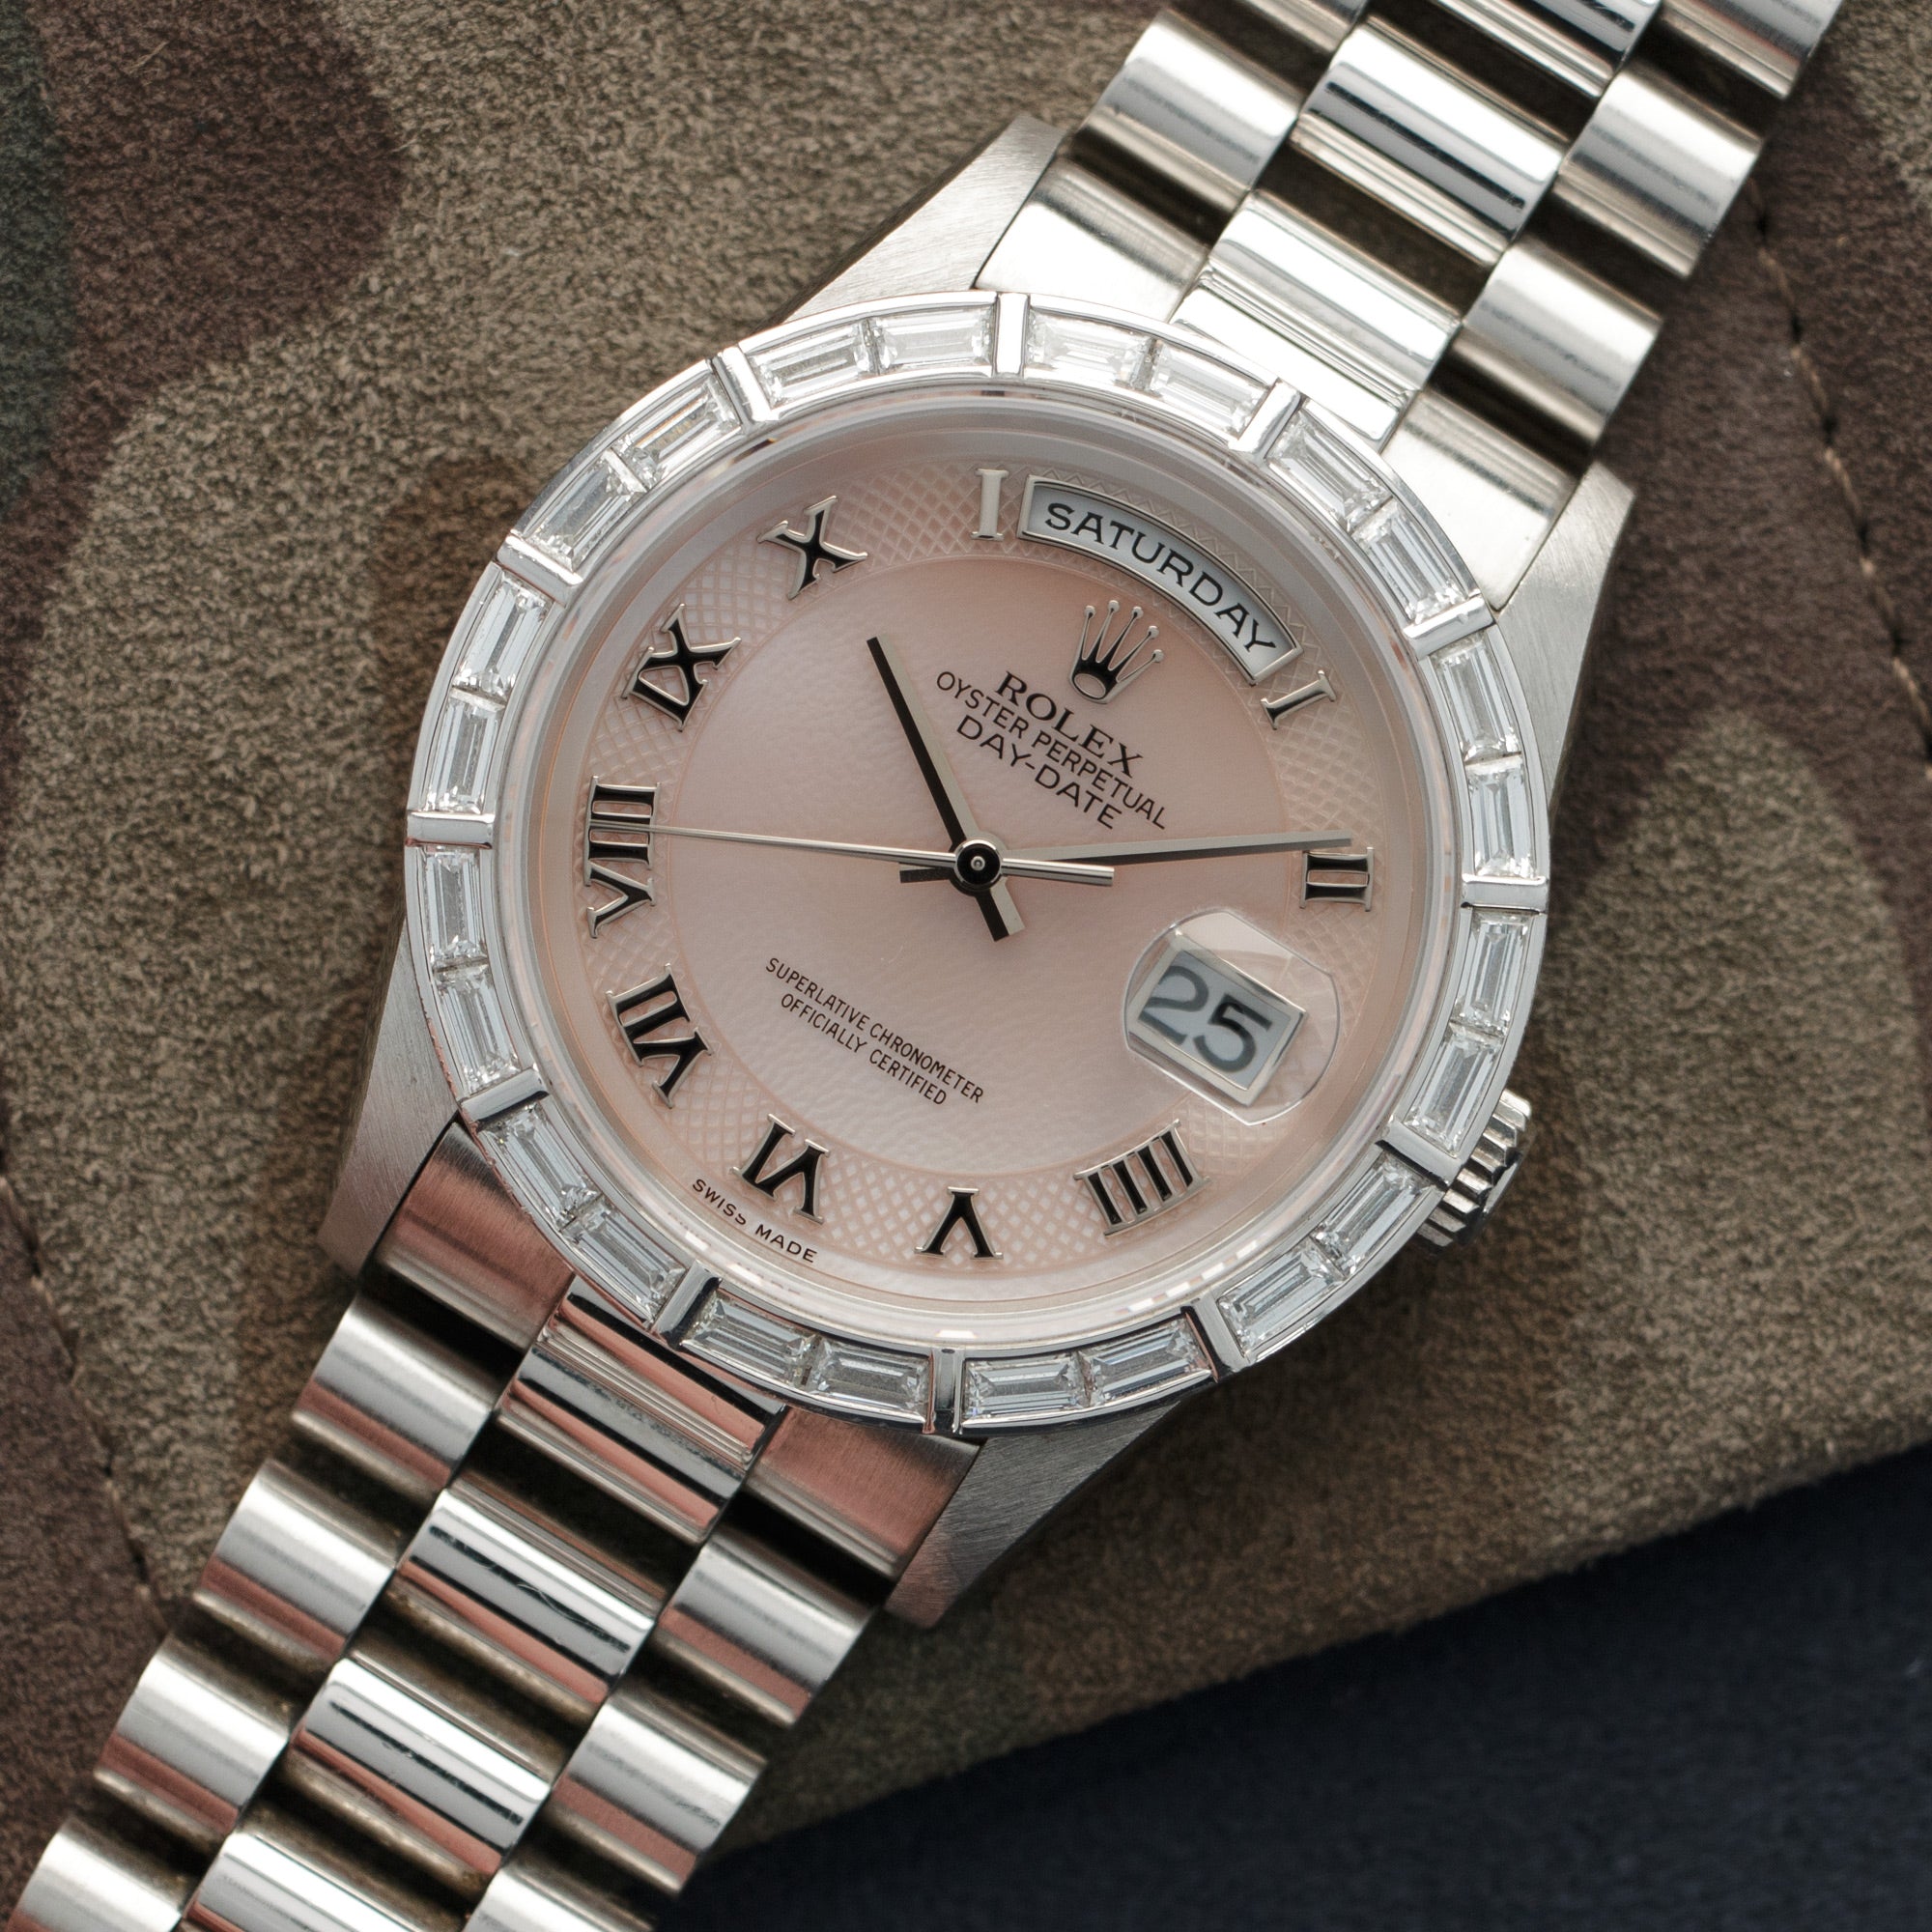 Rolex - Rolex Platinum Day-Date Mother of Pearl Watch Ref. 18366 - The Keystone Watches